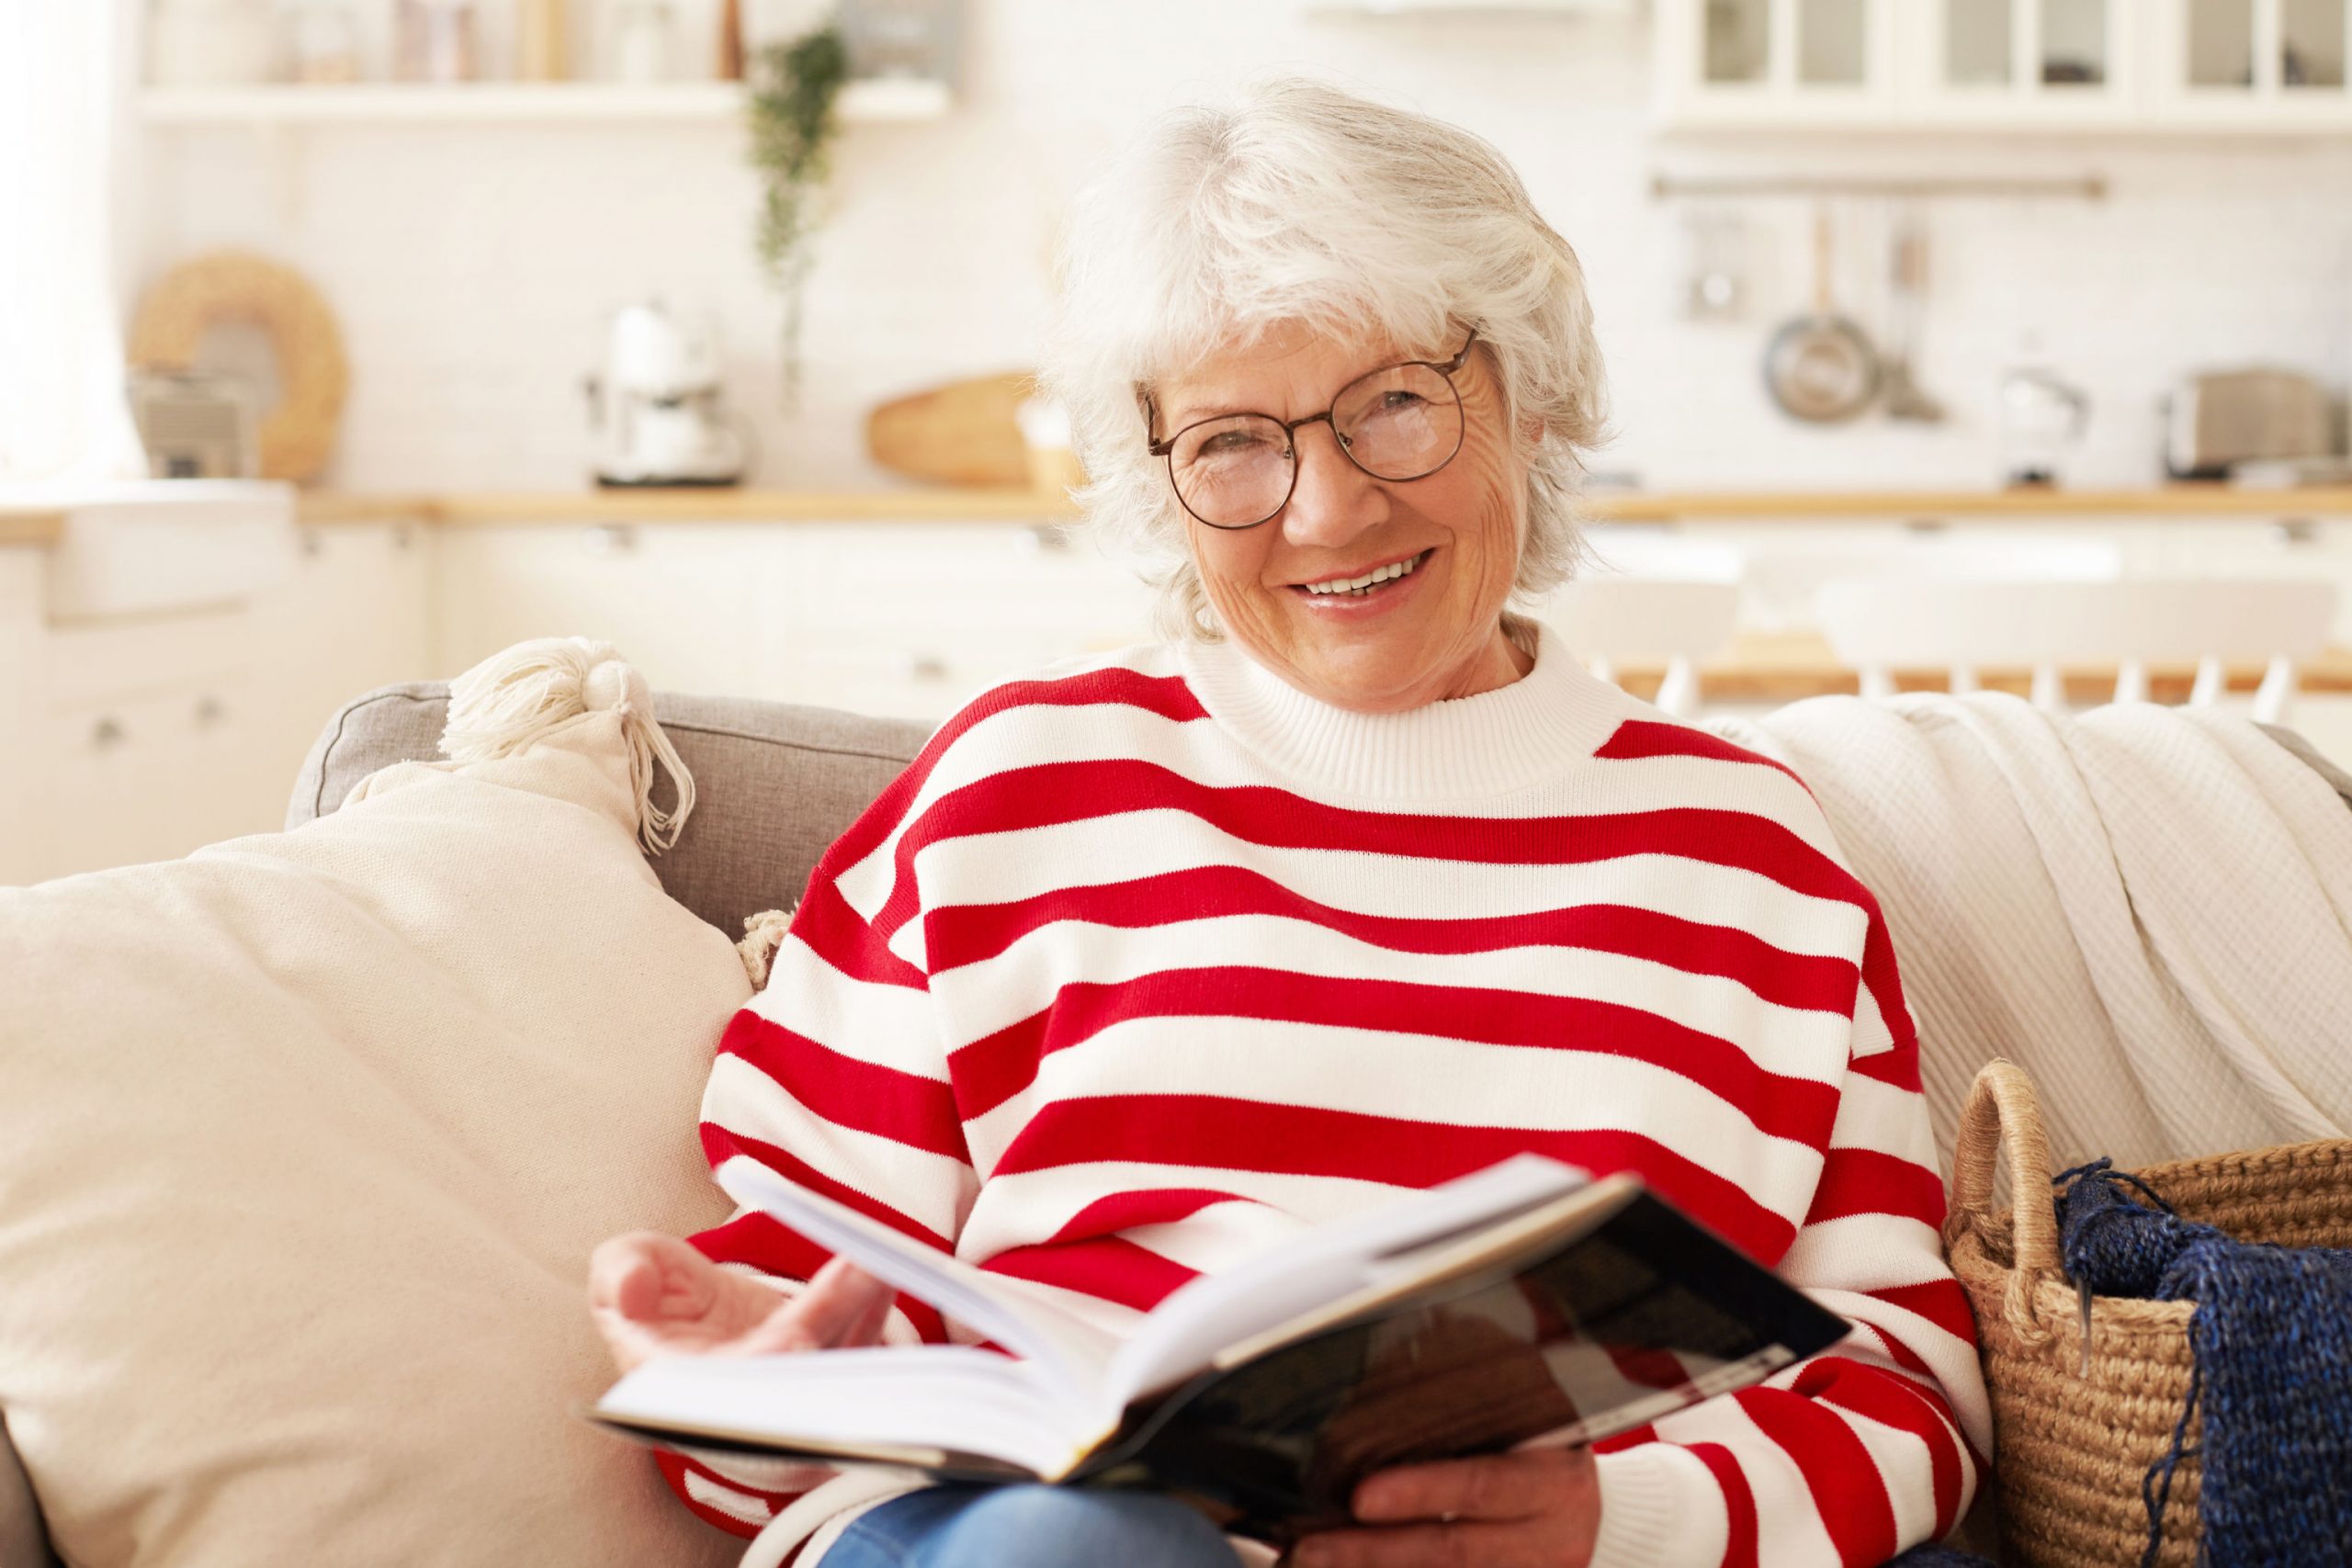 What Is FaceTime and Why Is It Important for Seniors?